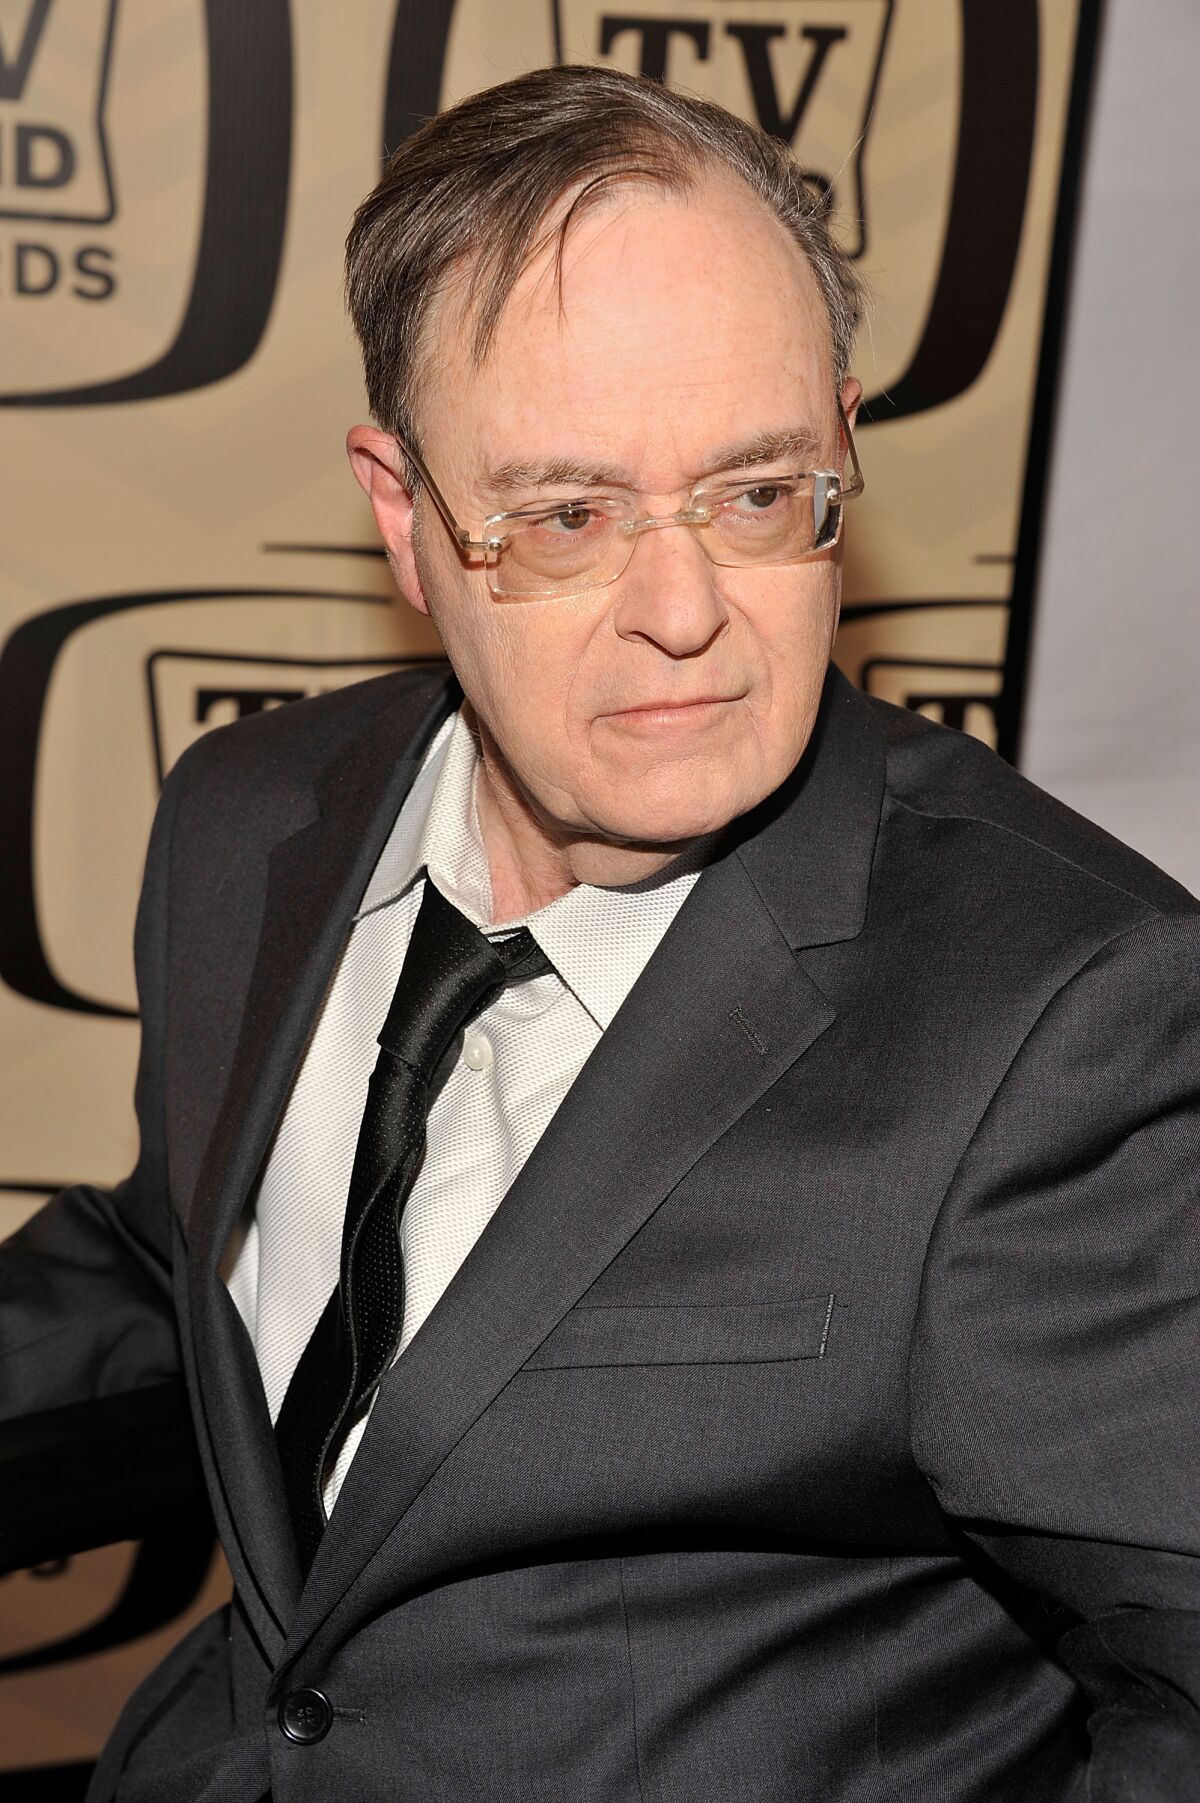 Actor David Lander attends the 10th Annual TV Land Awards at the Lexington Avenue Armory on April 14, 2012 